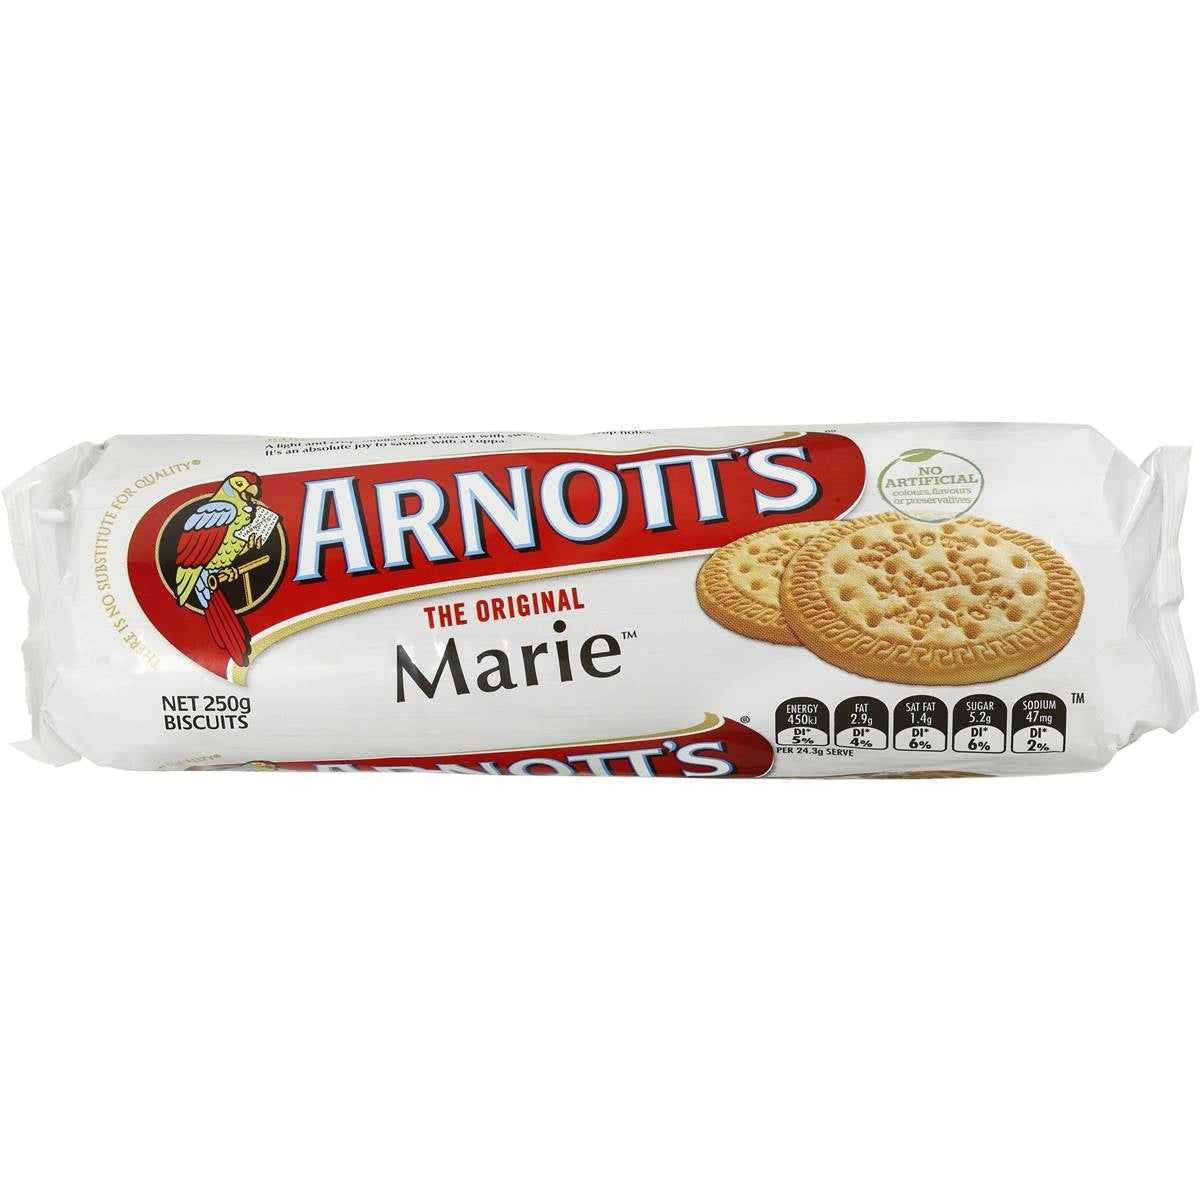 Arnotts Marie Biscuits 250g